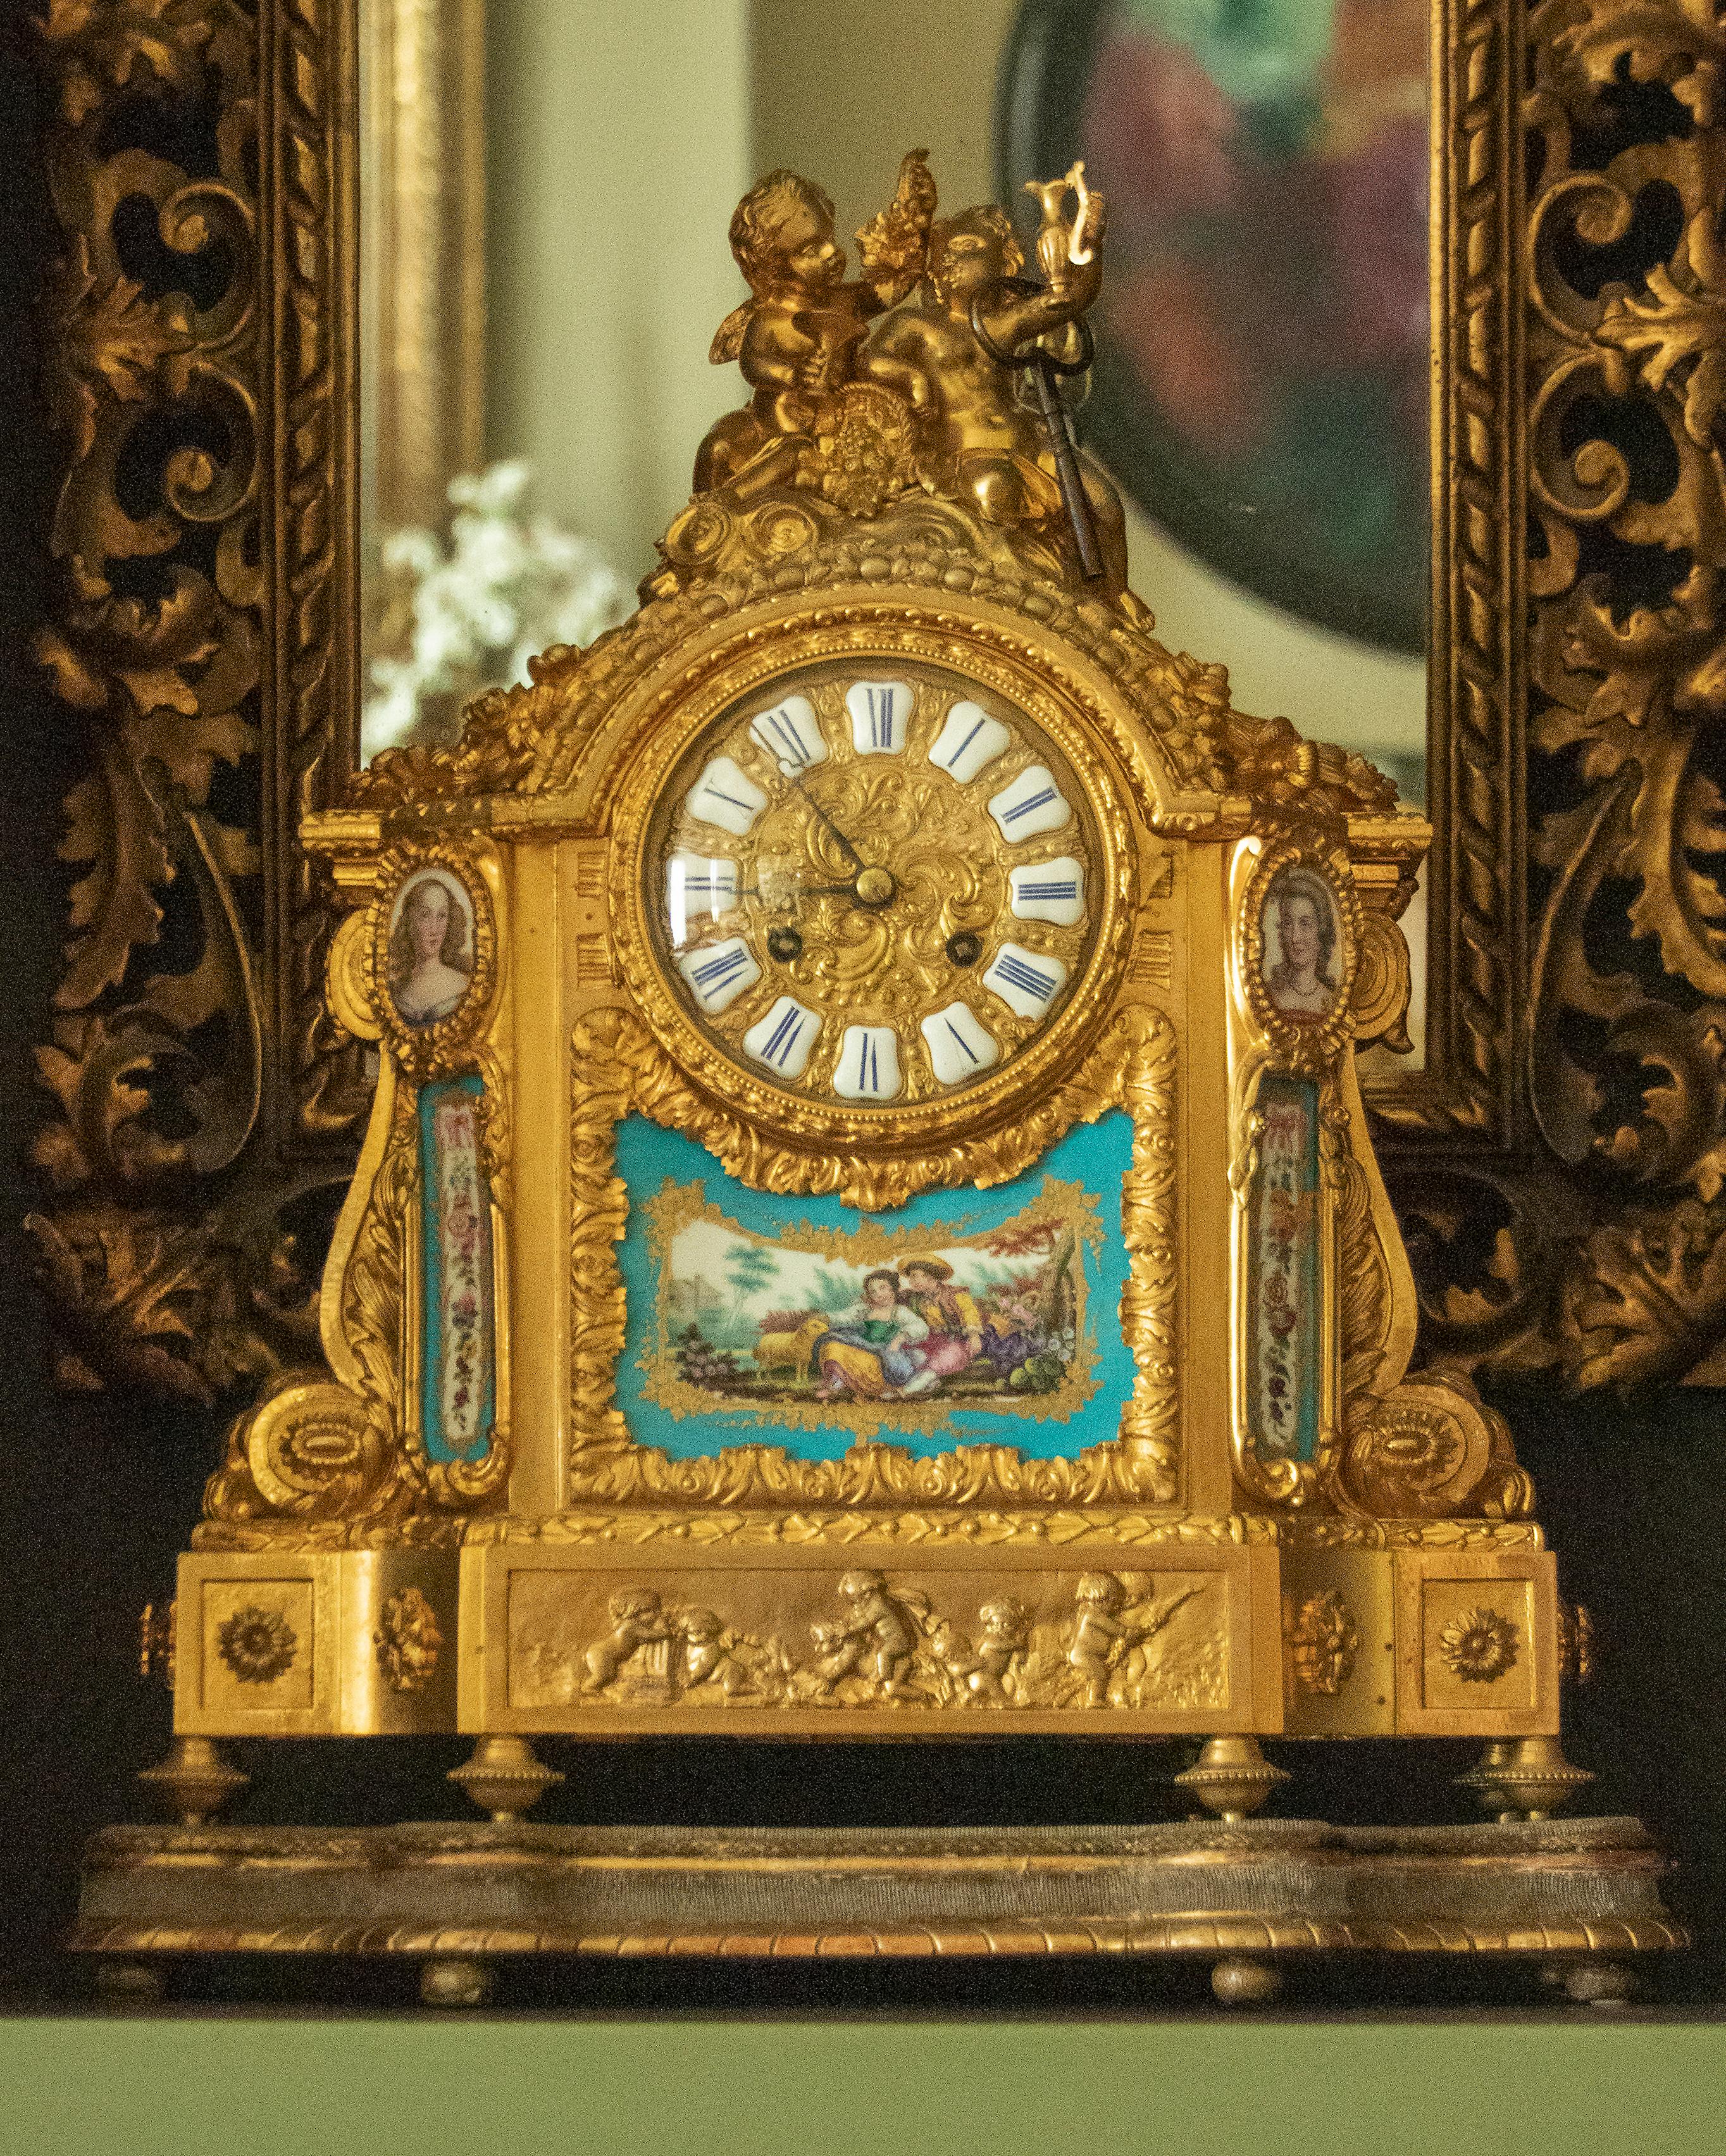 A fine quality Louis XVI style bronze ormolu mantel clock. The case is made of gilt brass and bronze ormolu casted ornaments, Roman numerals in white enameled cartouches. On top of two wine drinking putti with a basket of grapes and wine.